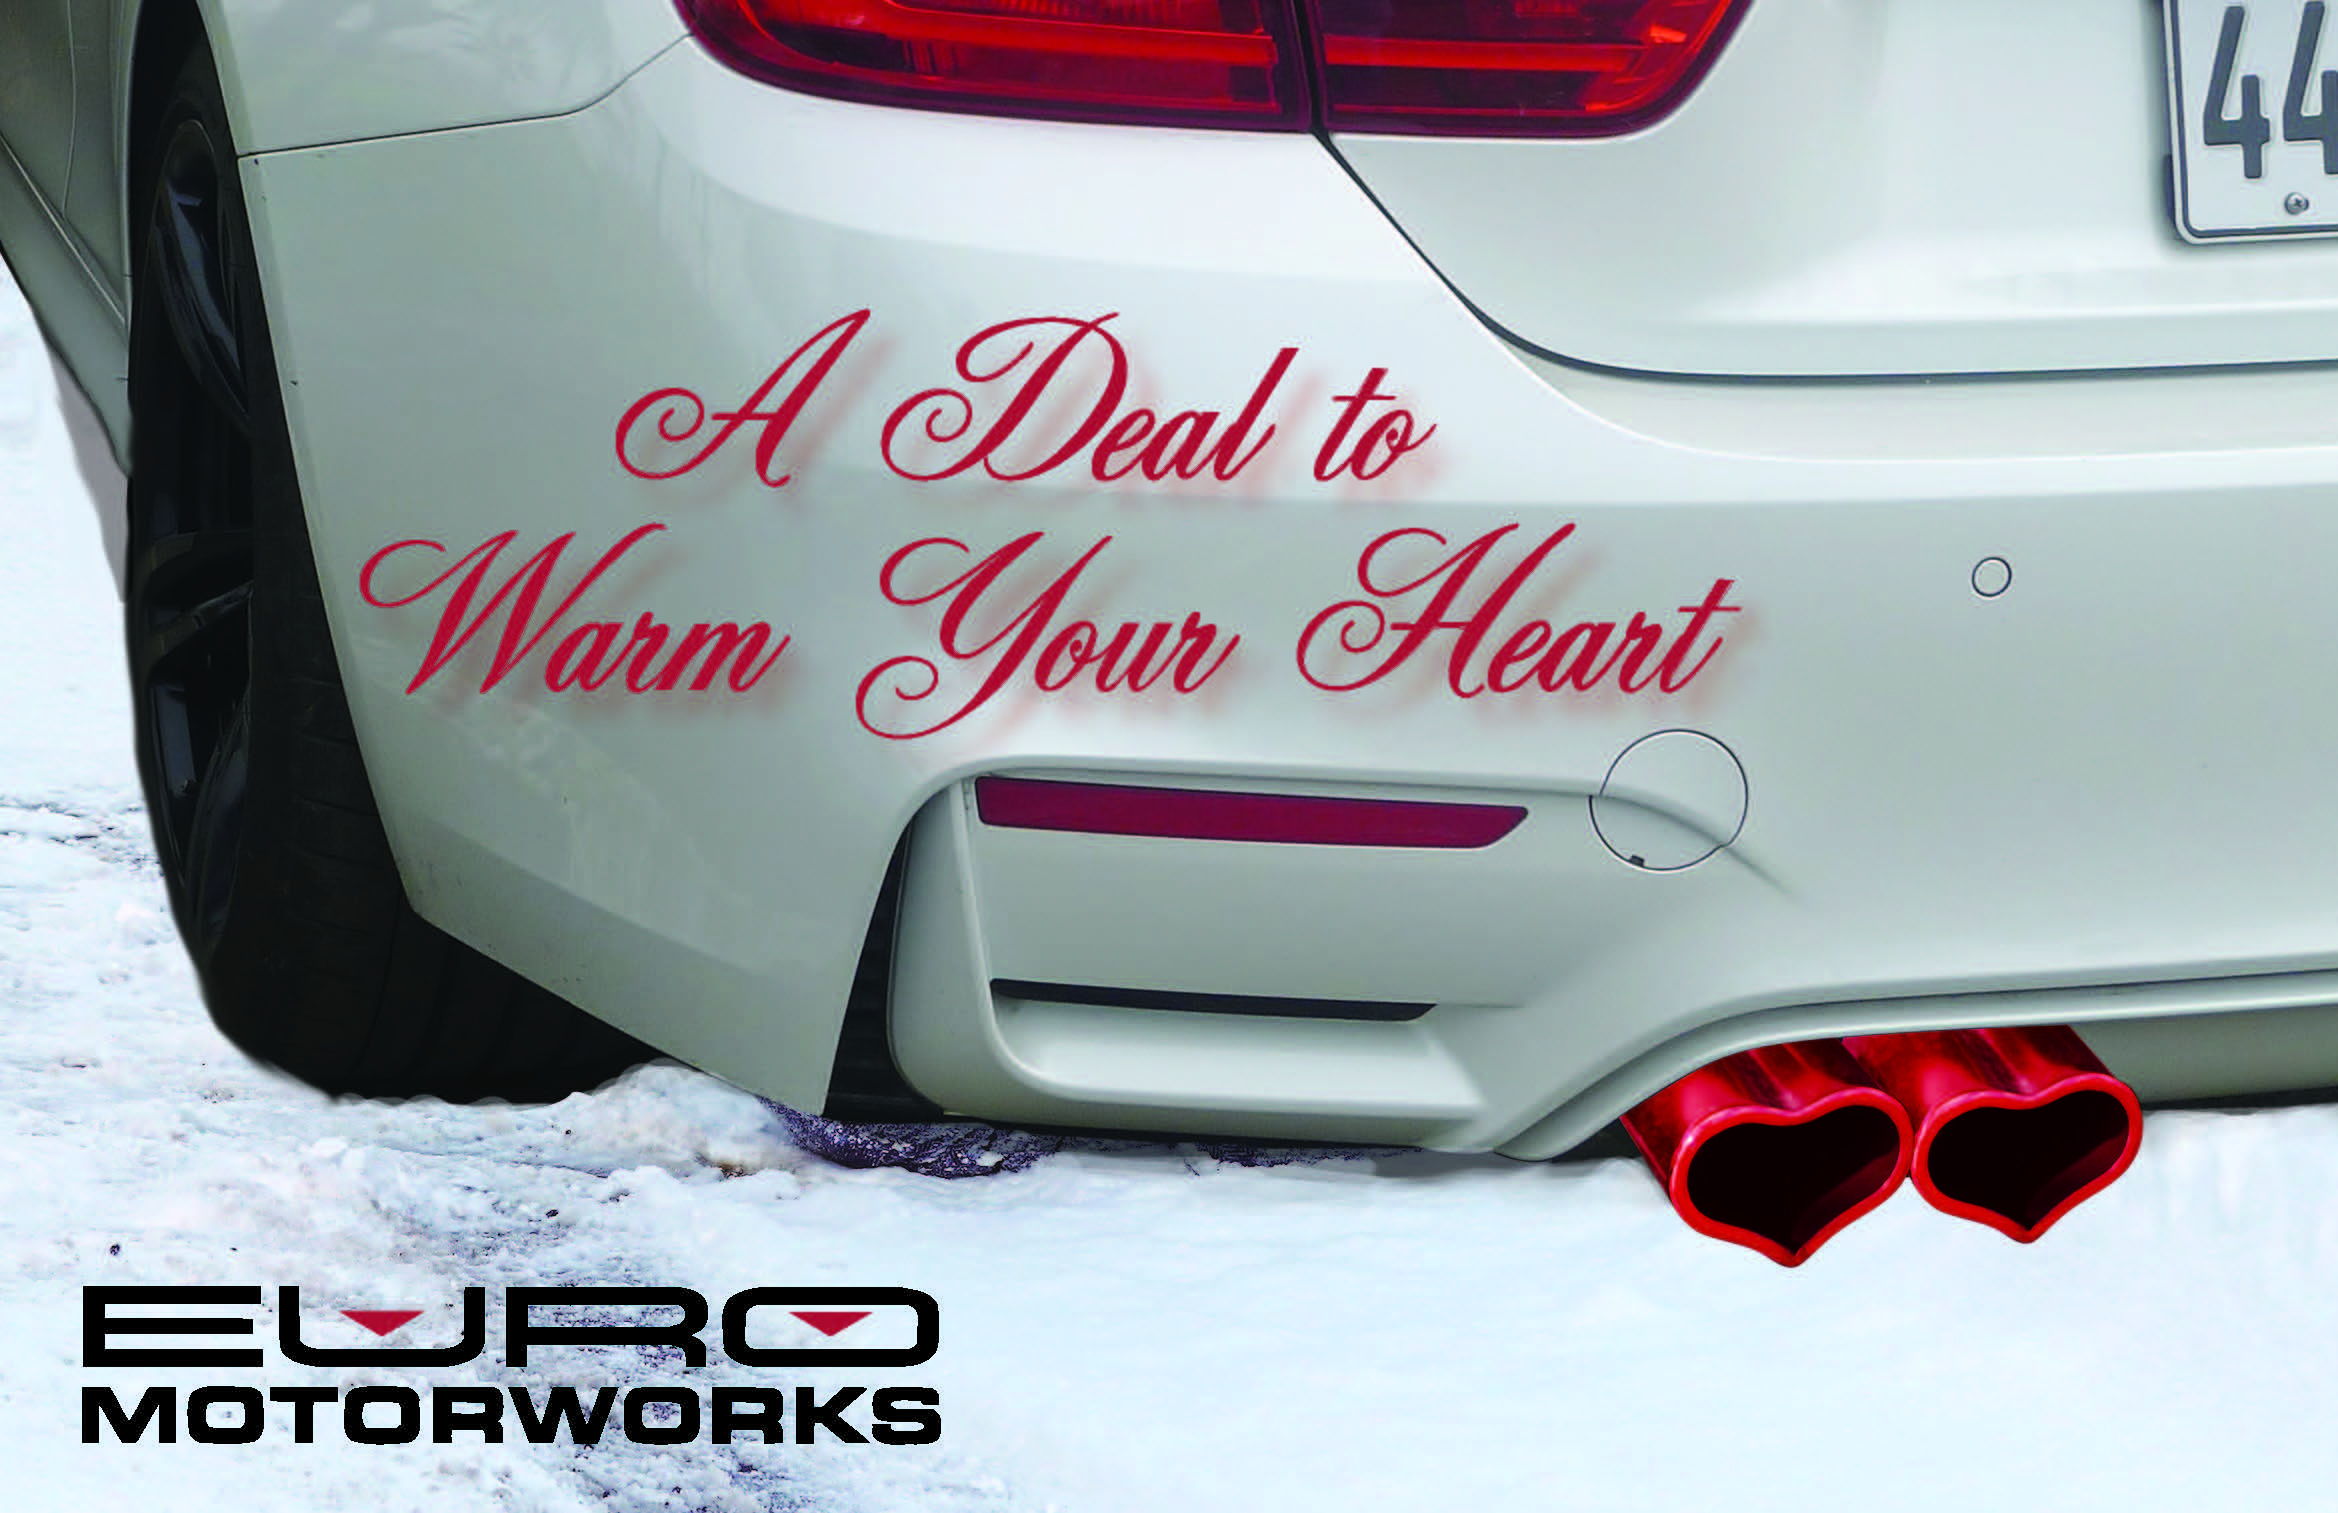 a deal to warm your heart bumper sticker